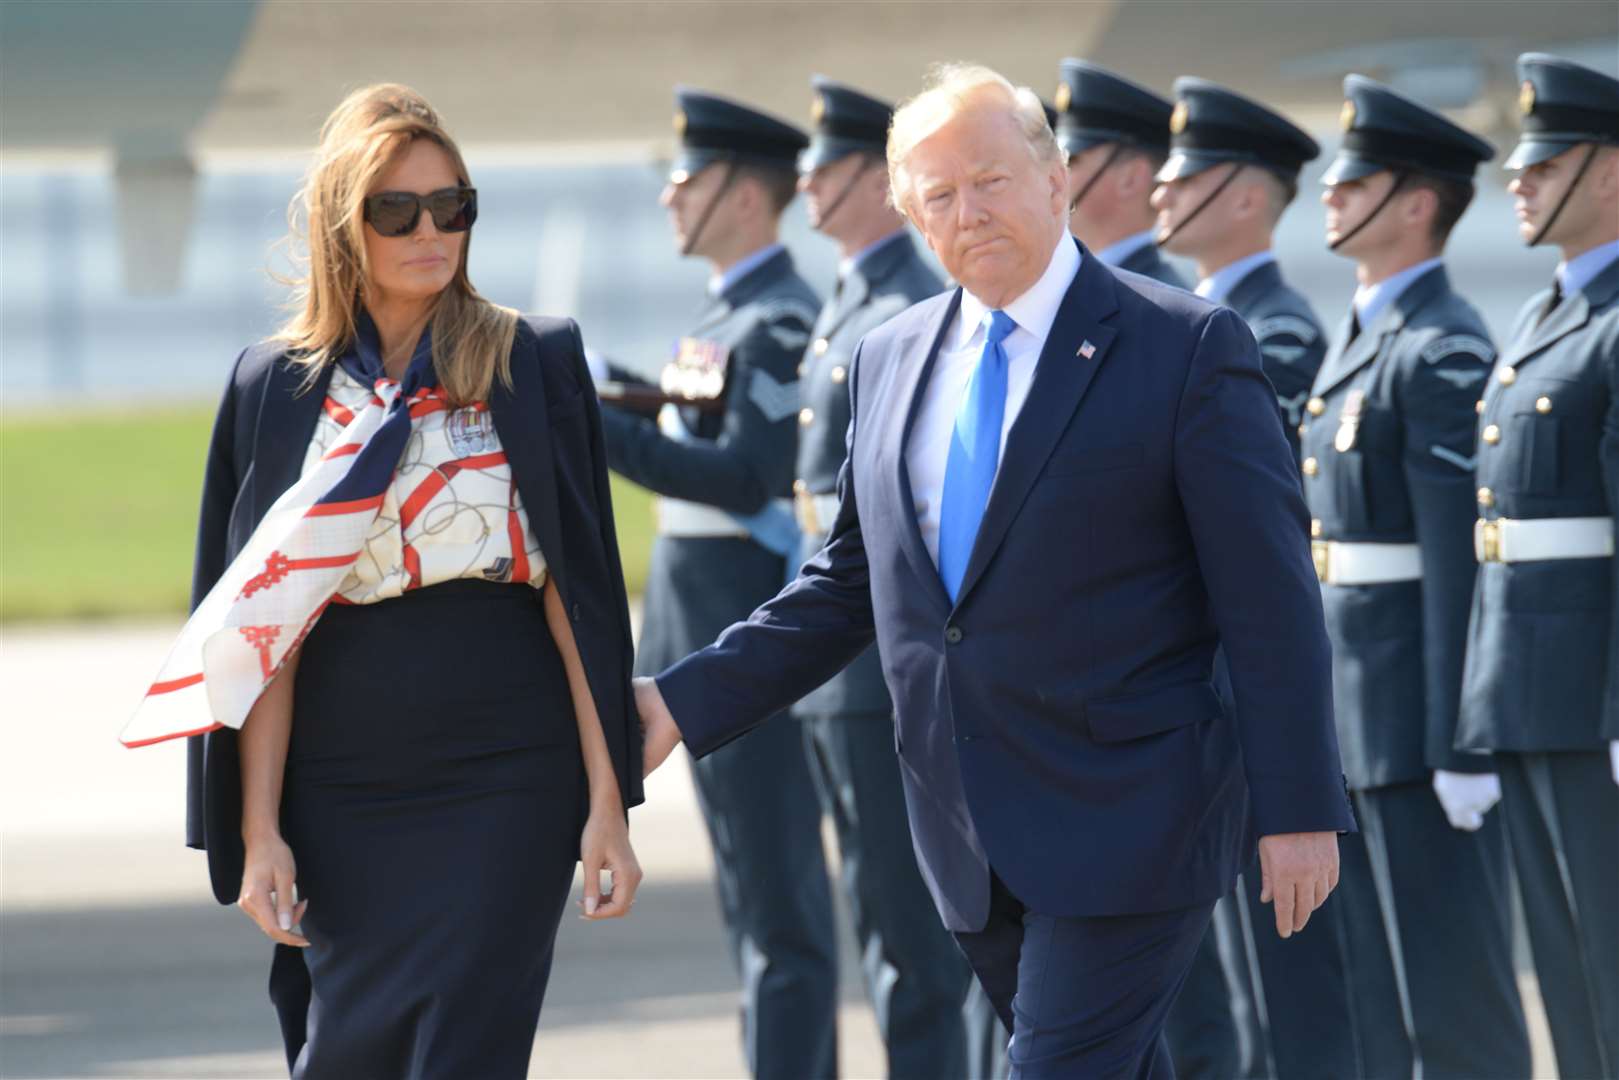 Arrival of The President and wife Melania at Stansted Airport for State Visit to the UK Picture: Vikki Lince